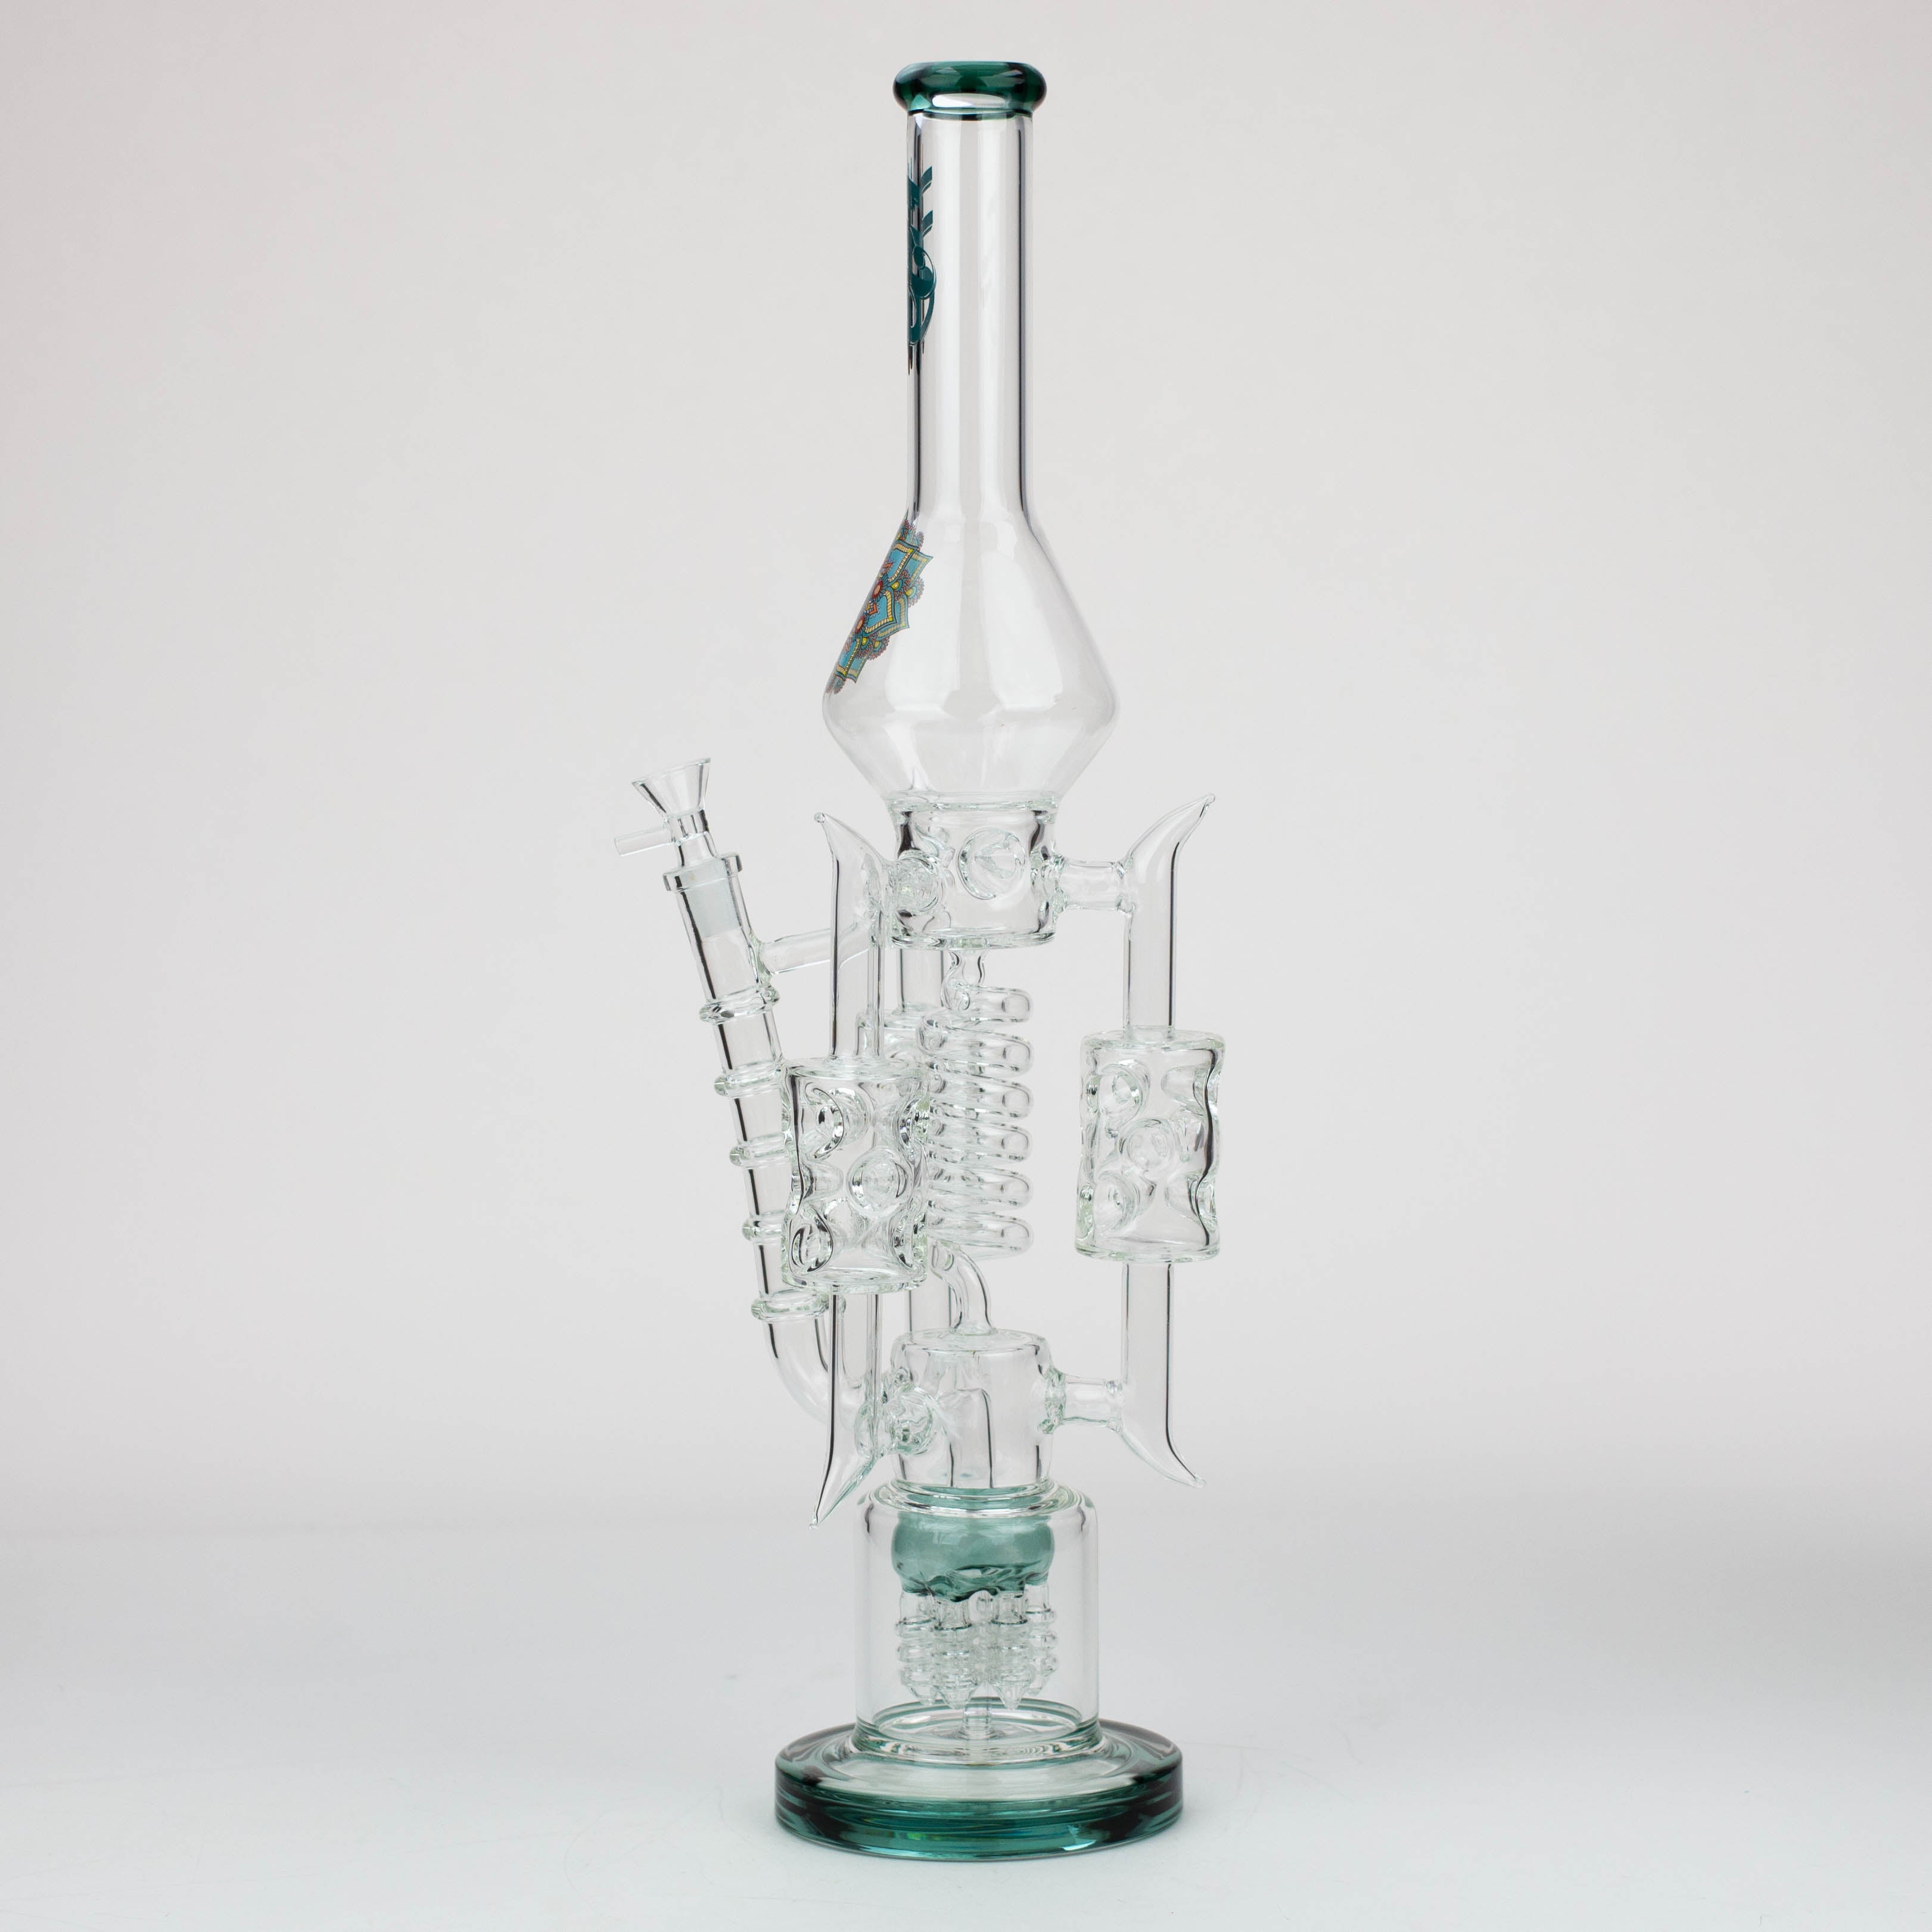 21" H2O Coil Glass water recycle bong [H2O-19]_10